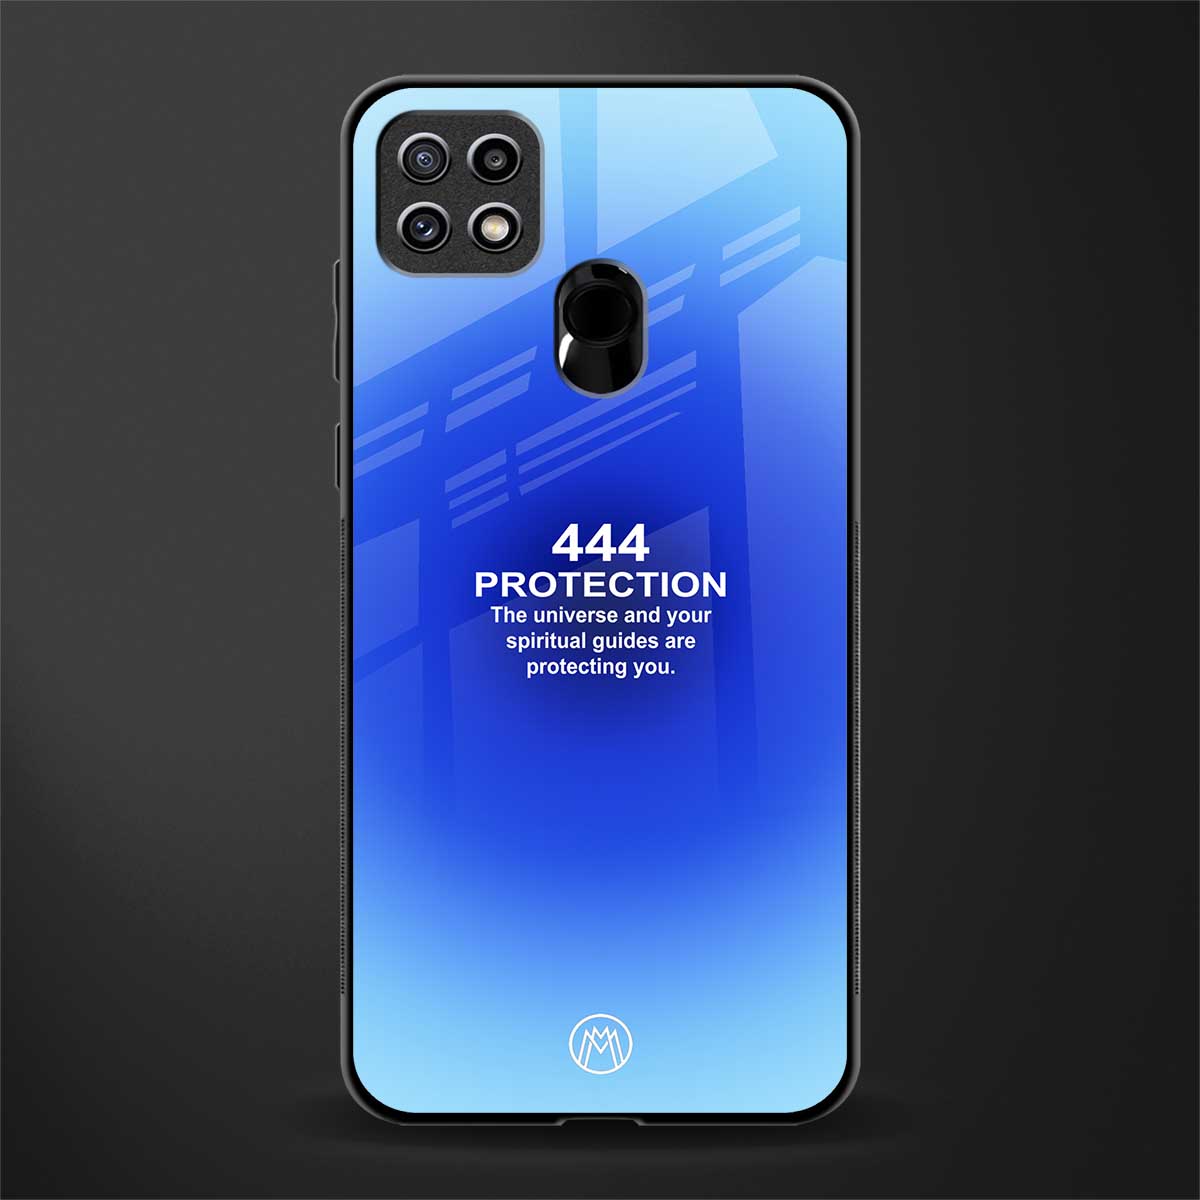 444 protection glass case for oppo a15 image